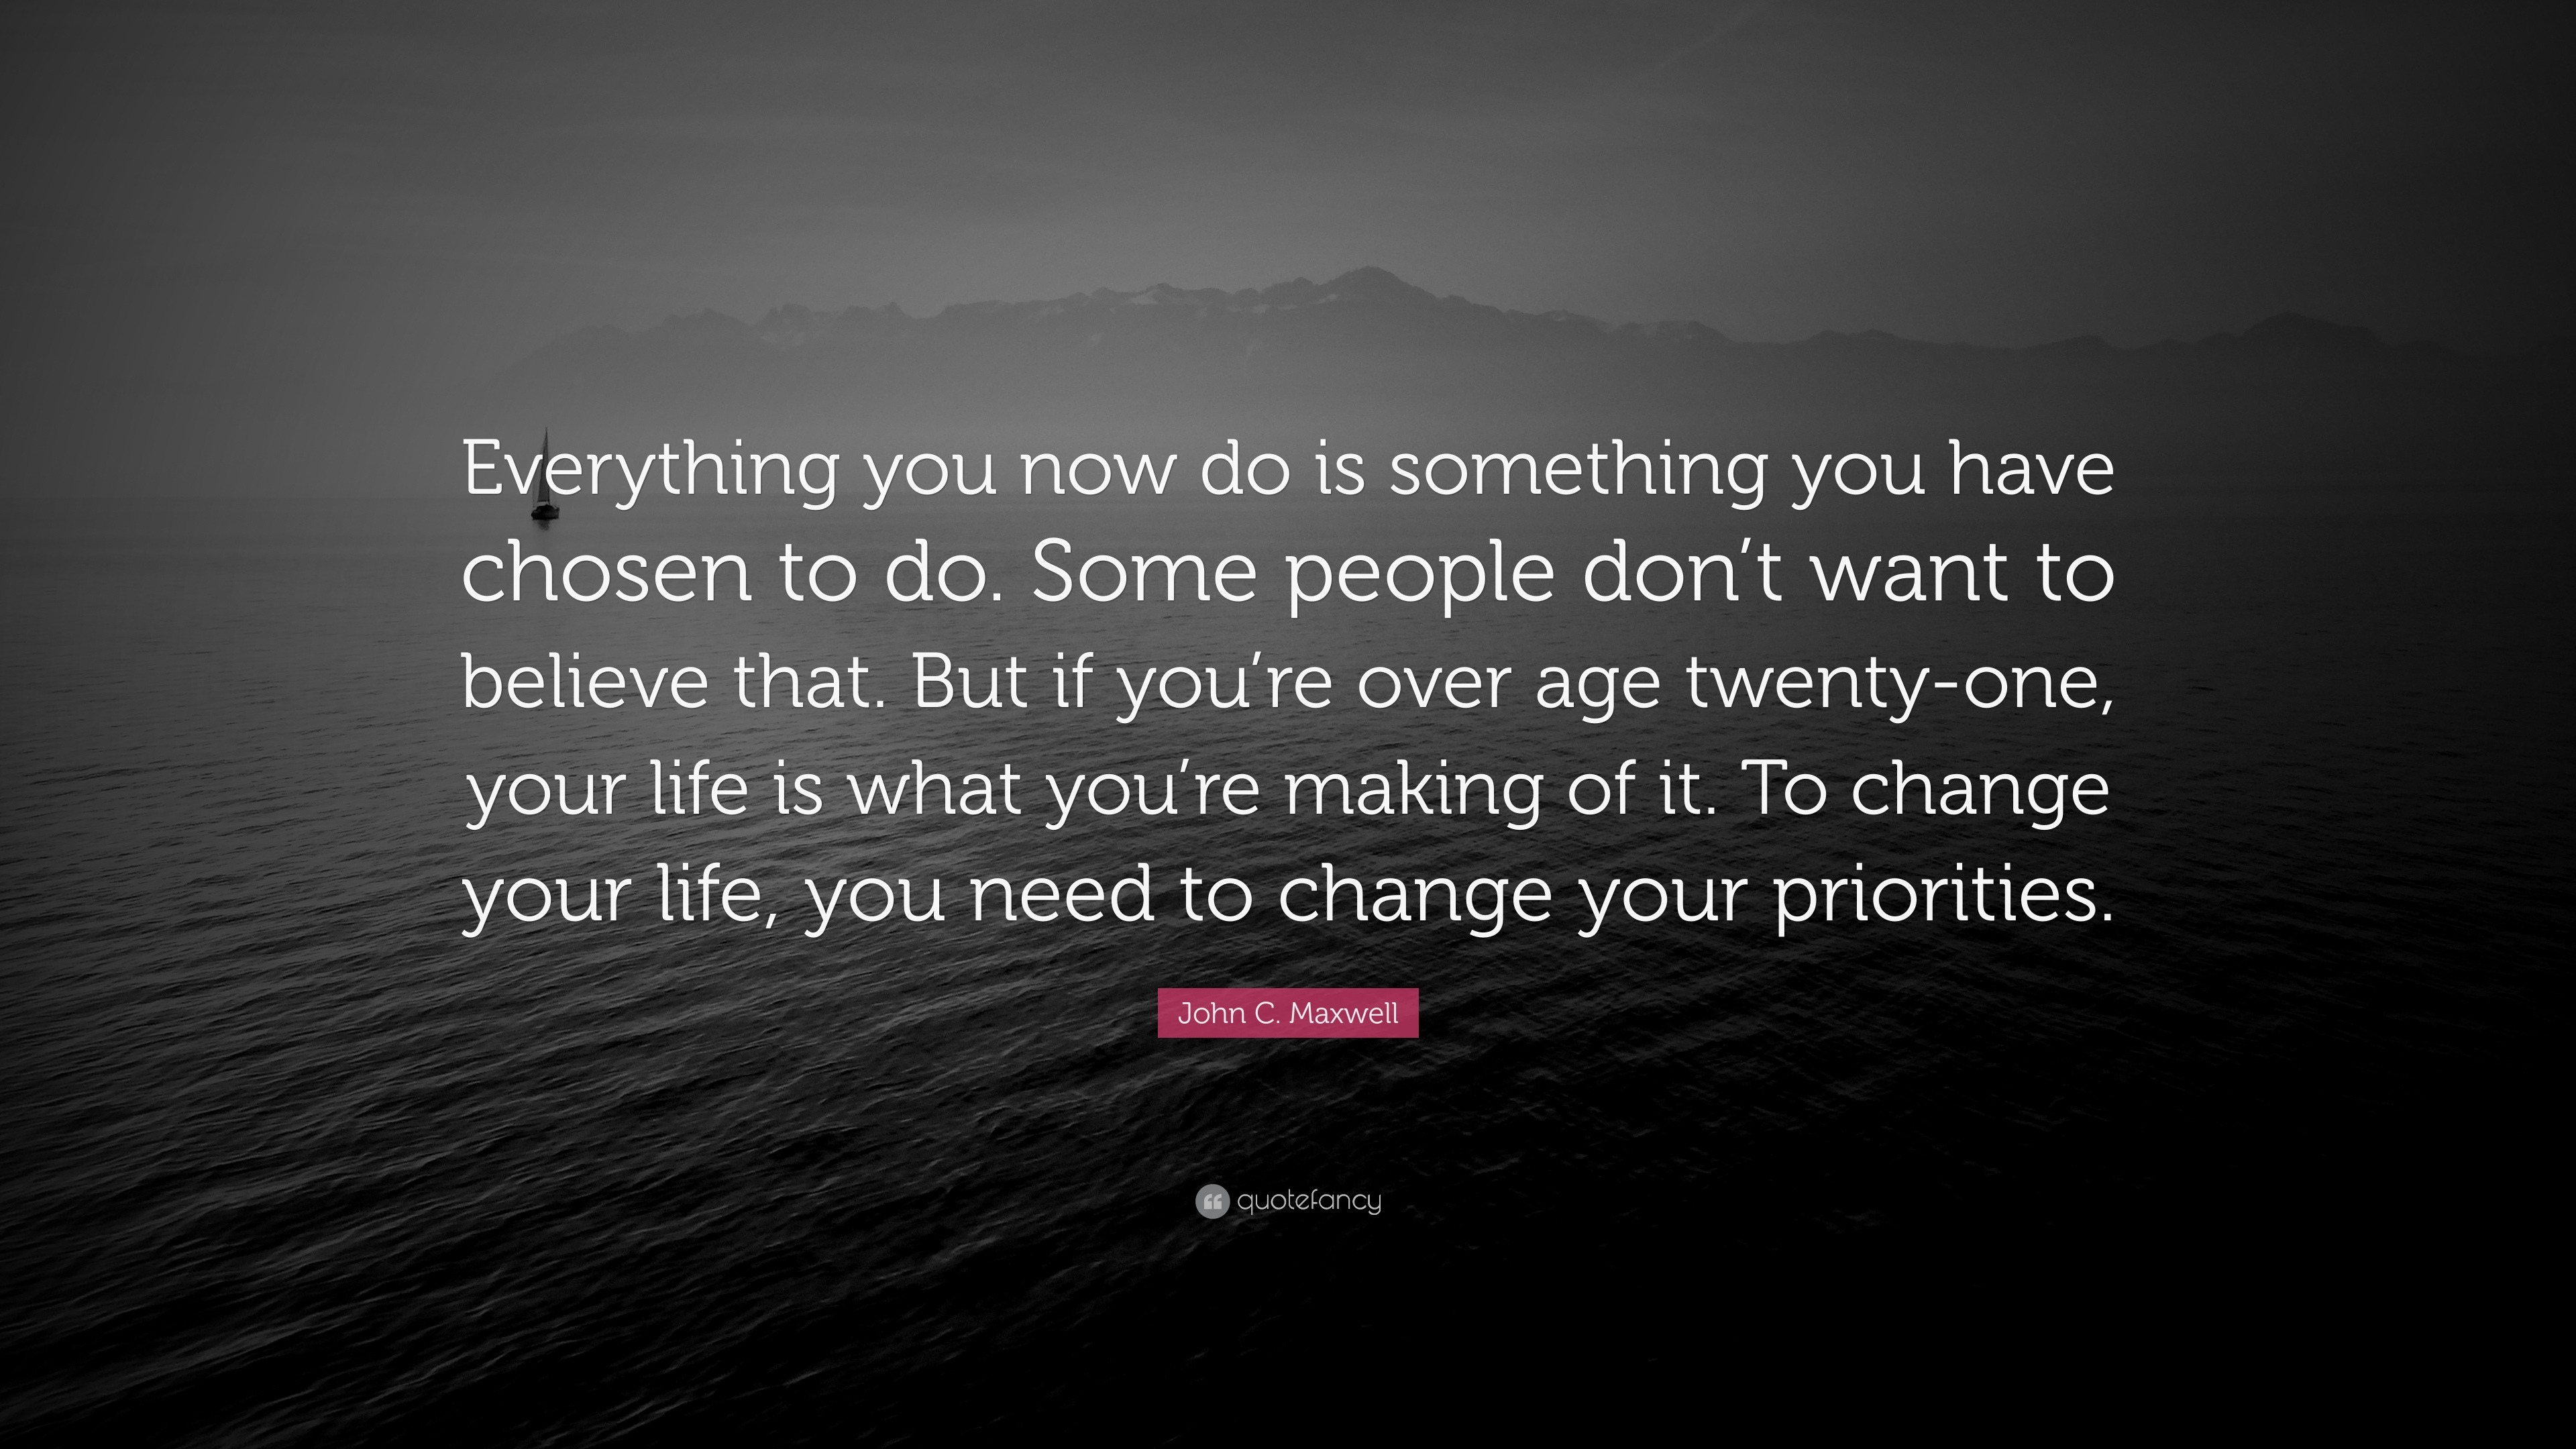 John C. Maxwell Quote: “Everything you now do is something you have ...